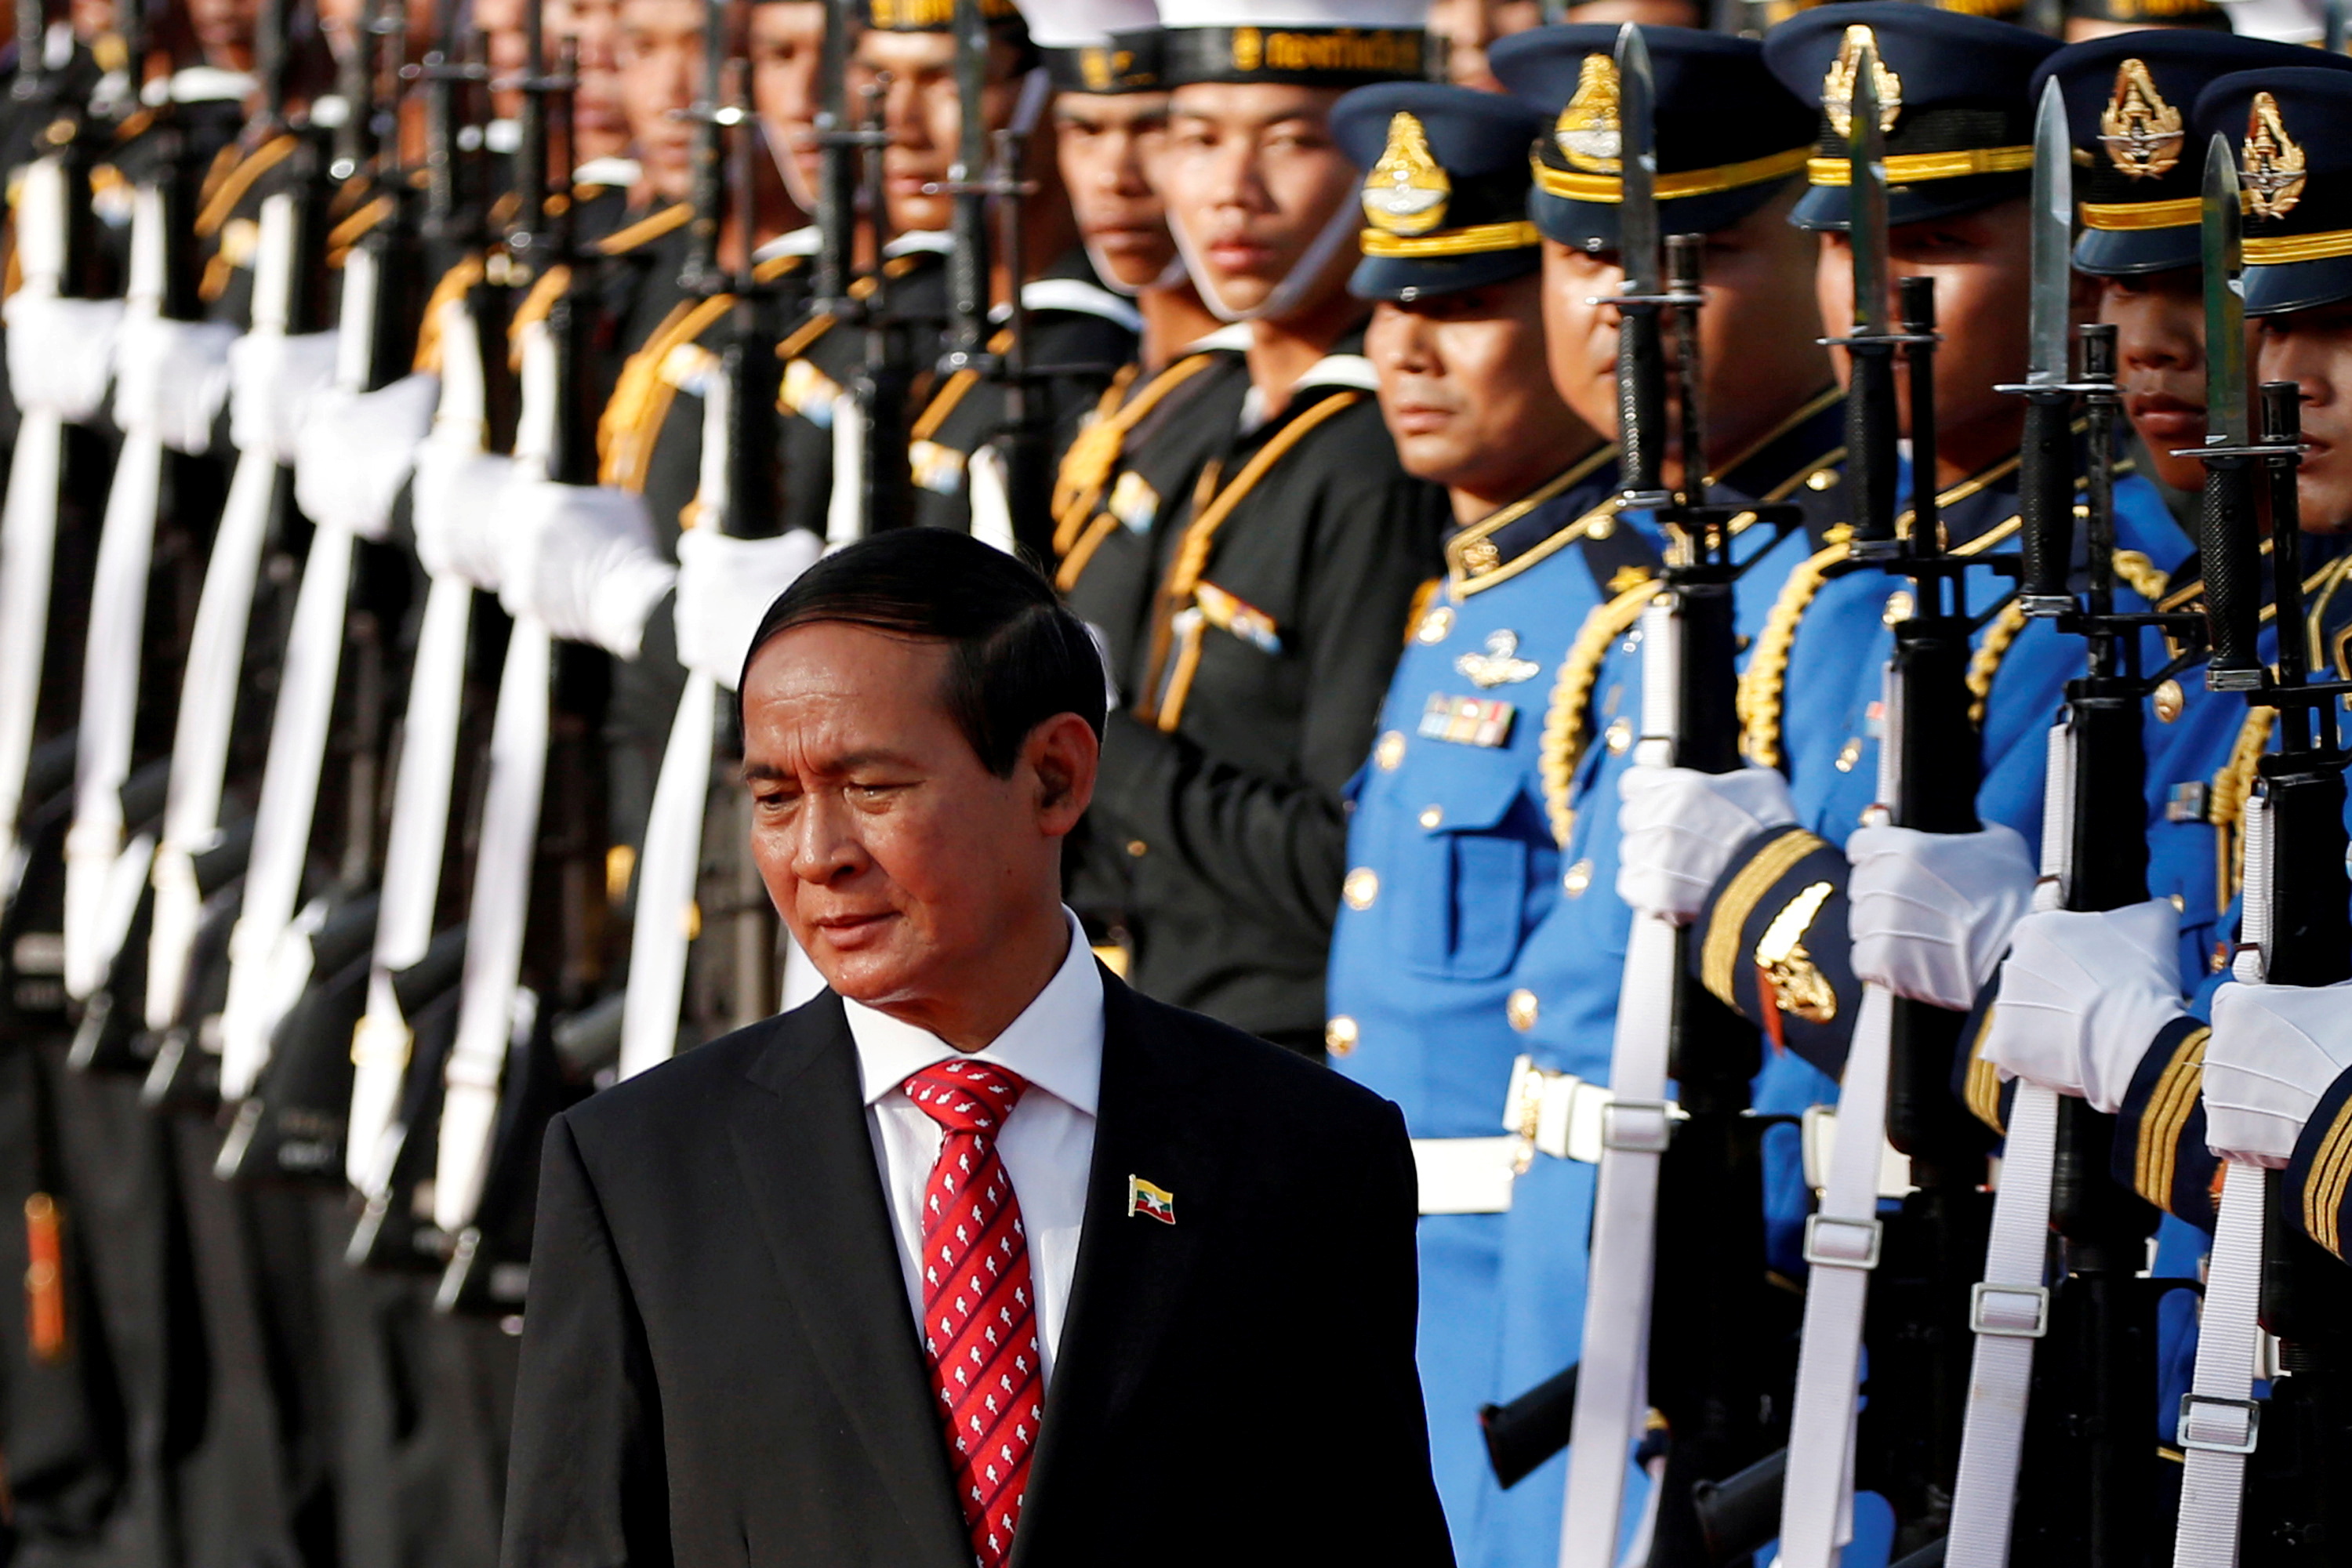 Myanmar's president Win Myint reviews the honor guard during his welcome ceremony at the Government House in Bangkok